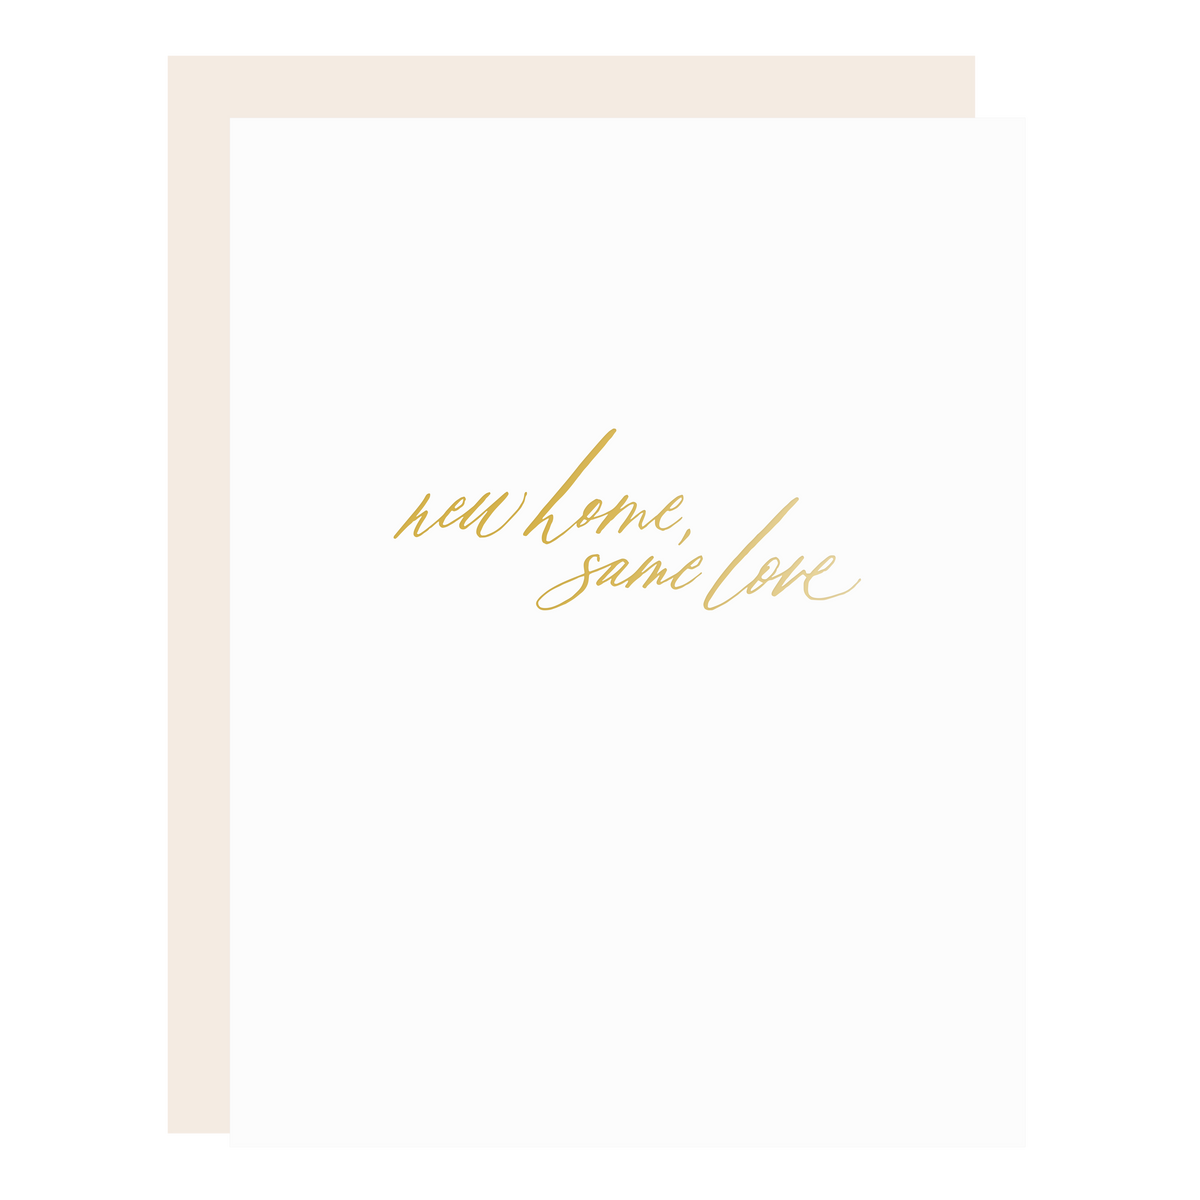 &quot;New Home, Same Love&quot; card, letterpress printed by hand in gold foil. 